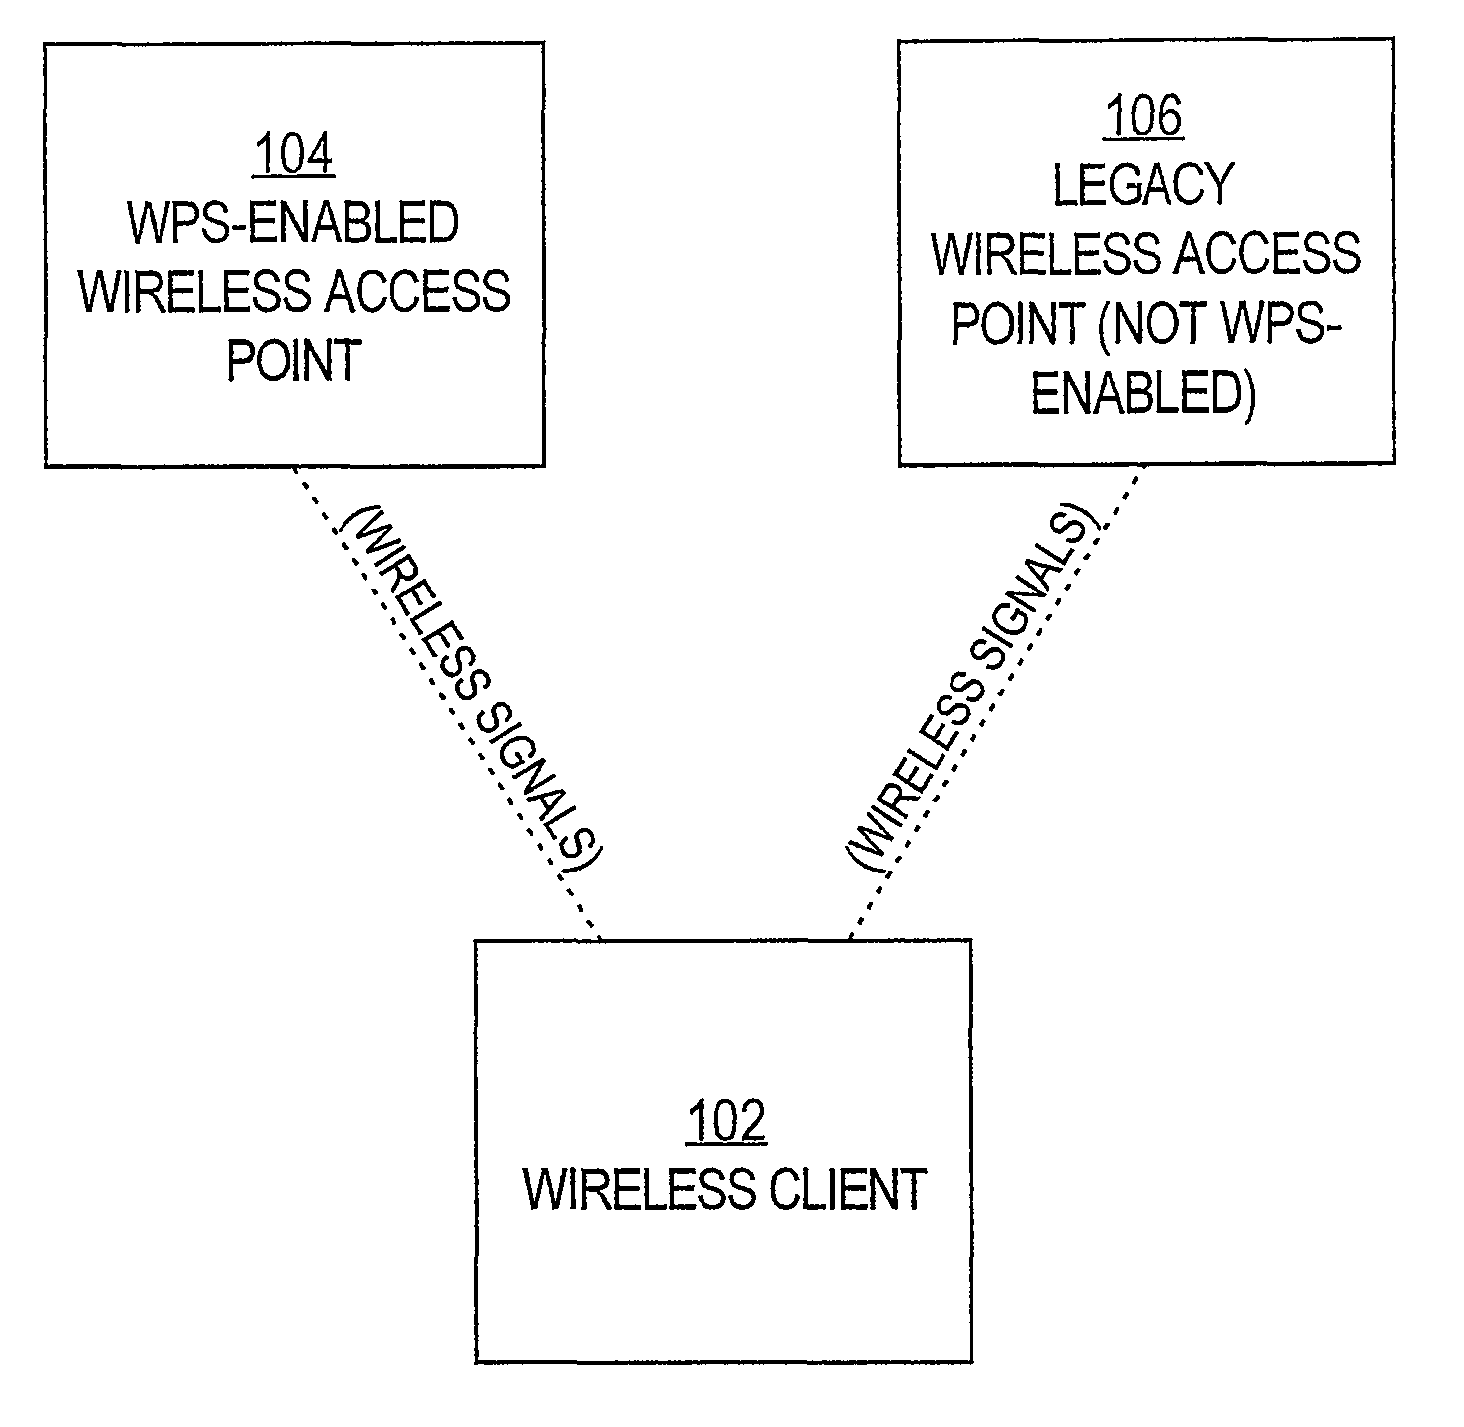 Legacy support for Wi-Fi protected setup